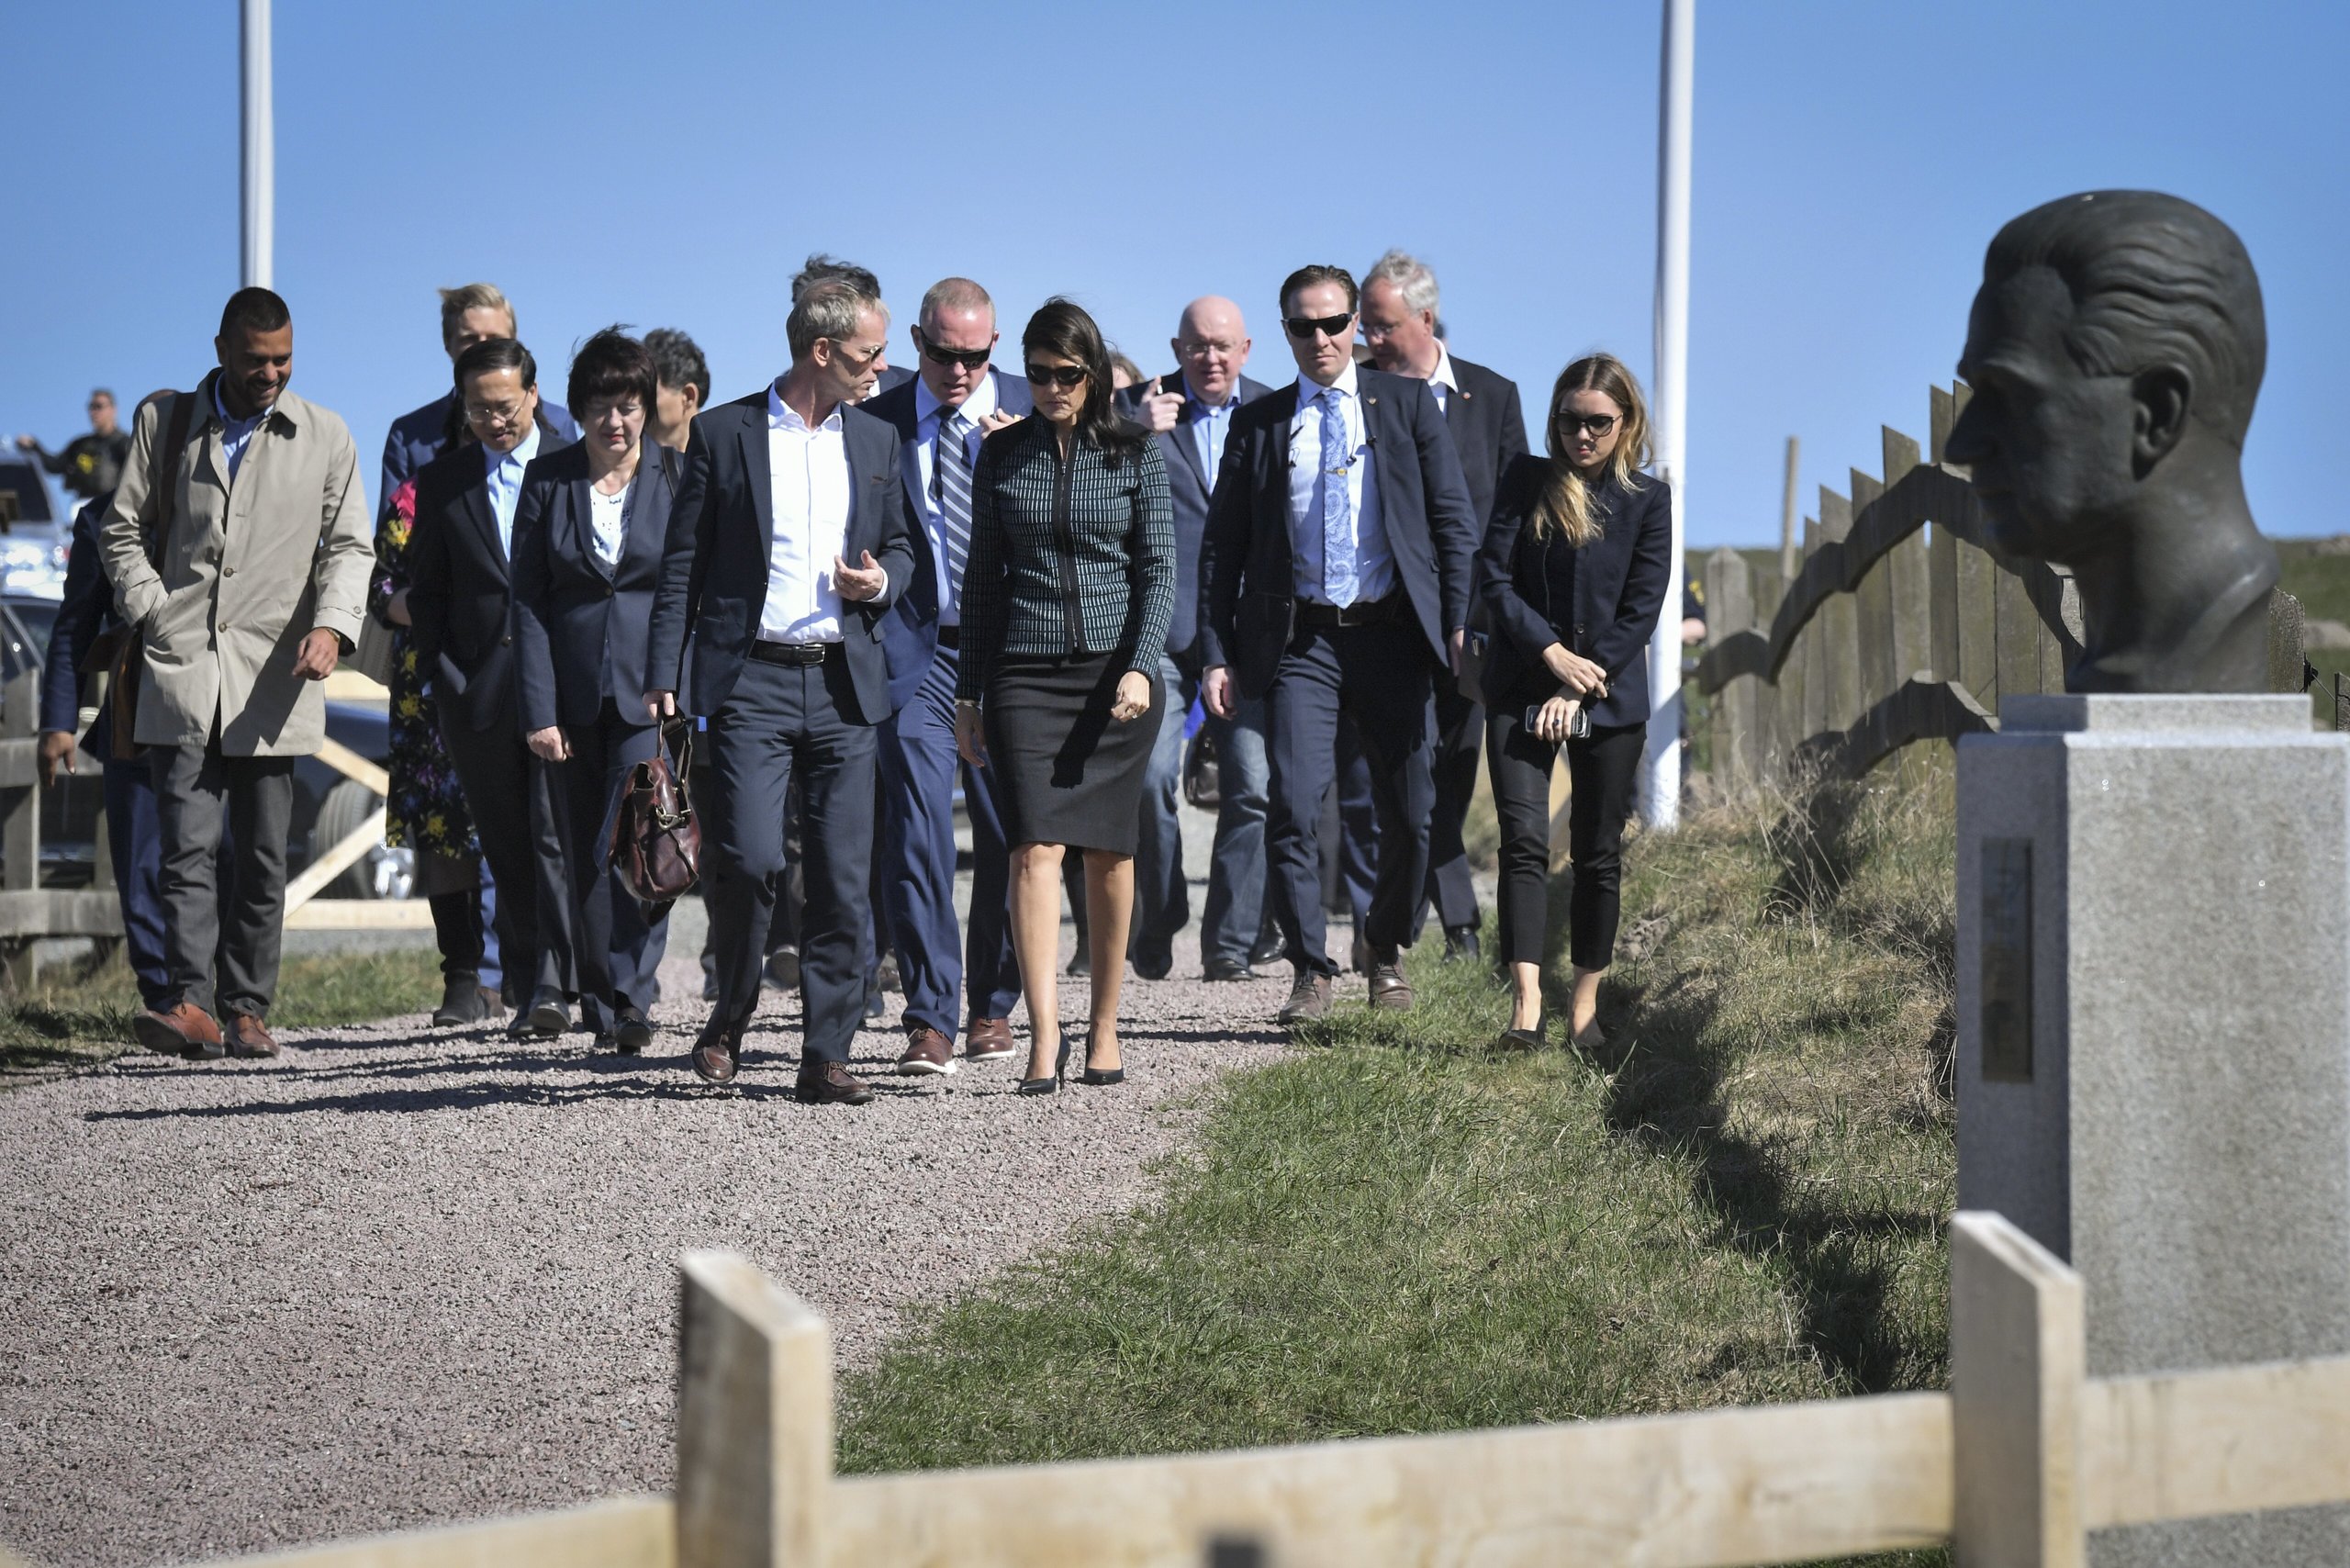 epa06682905 Sweden's ambassador to the United Nations Olof Skoog (front L) and United States Ambassador to the UN Nikki Haley (front R) and other members of the UN Security Council arrive for a meeting with UN Security Council meeting at Backakra outside Ystad, southern Sweden, 21 April 2018. The meeting on Syria will take place at Backakra, the estate of Dag Hammarskjold, who served as UN Secretary-General from 1953 until his death in a plane crash in September 1961.  EPA/JOHAN NILSSON SWEDEN OUT